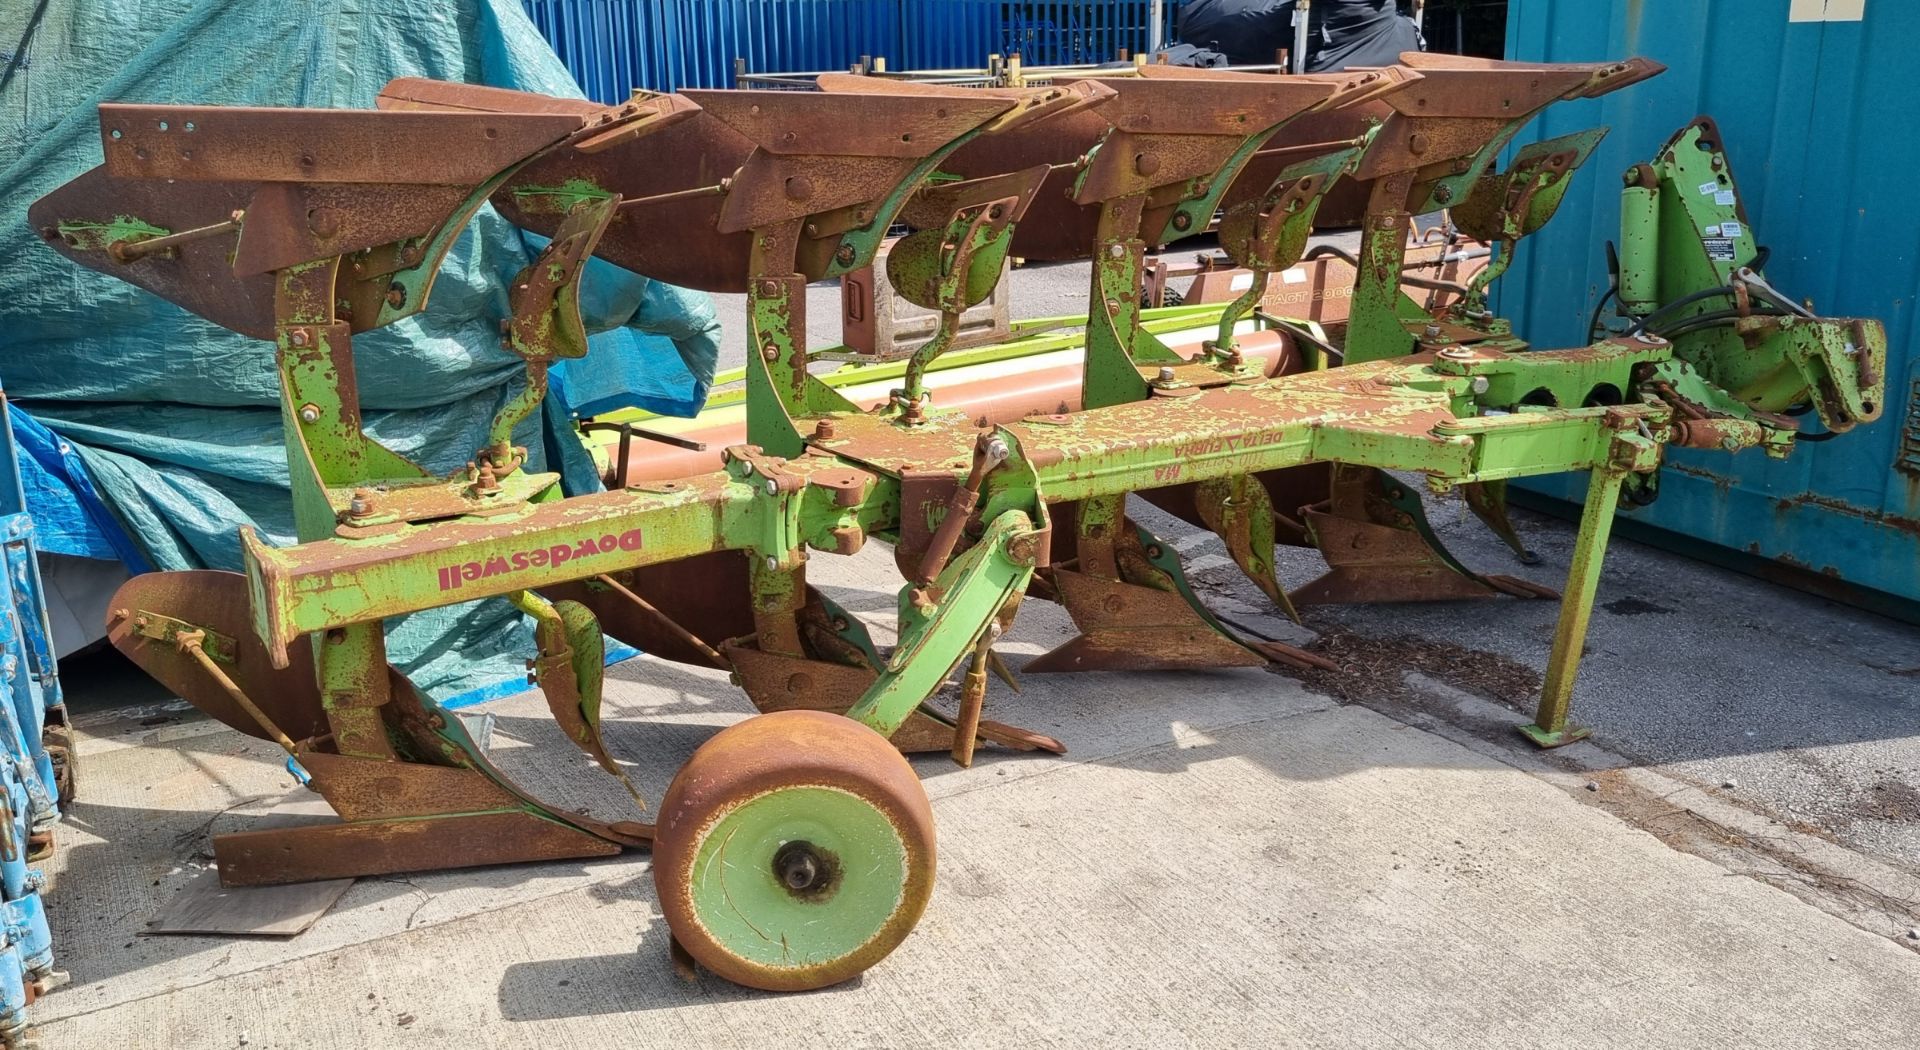 Dowdeswell Engineering Co Ltd DP100S 4 furrow reversible plough - Serial No. MA 36 209 - Image 2 of 6